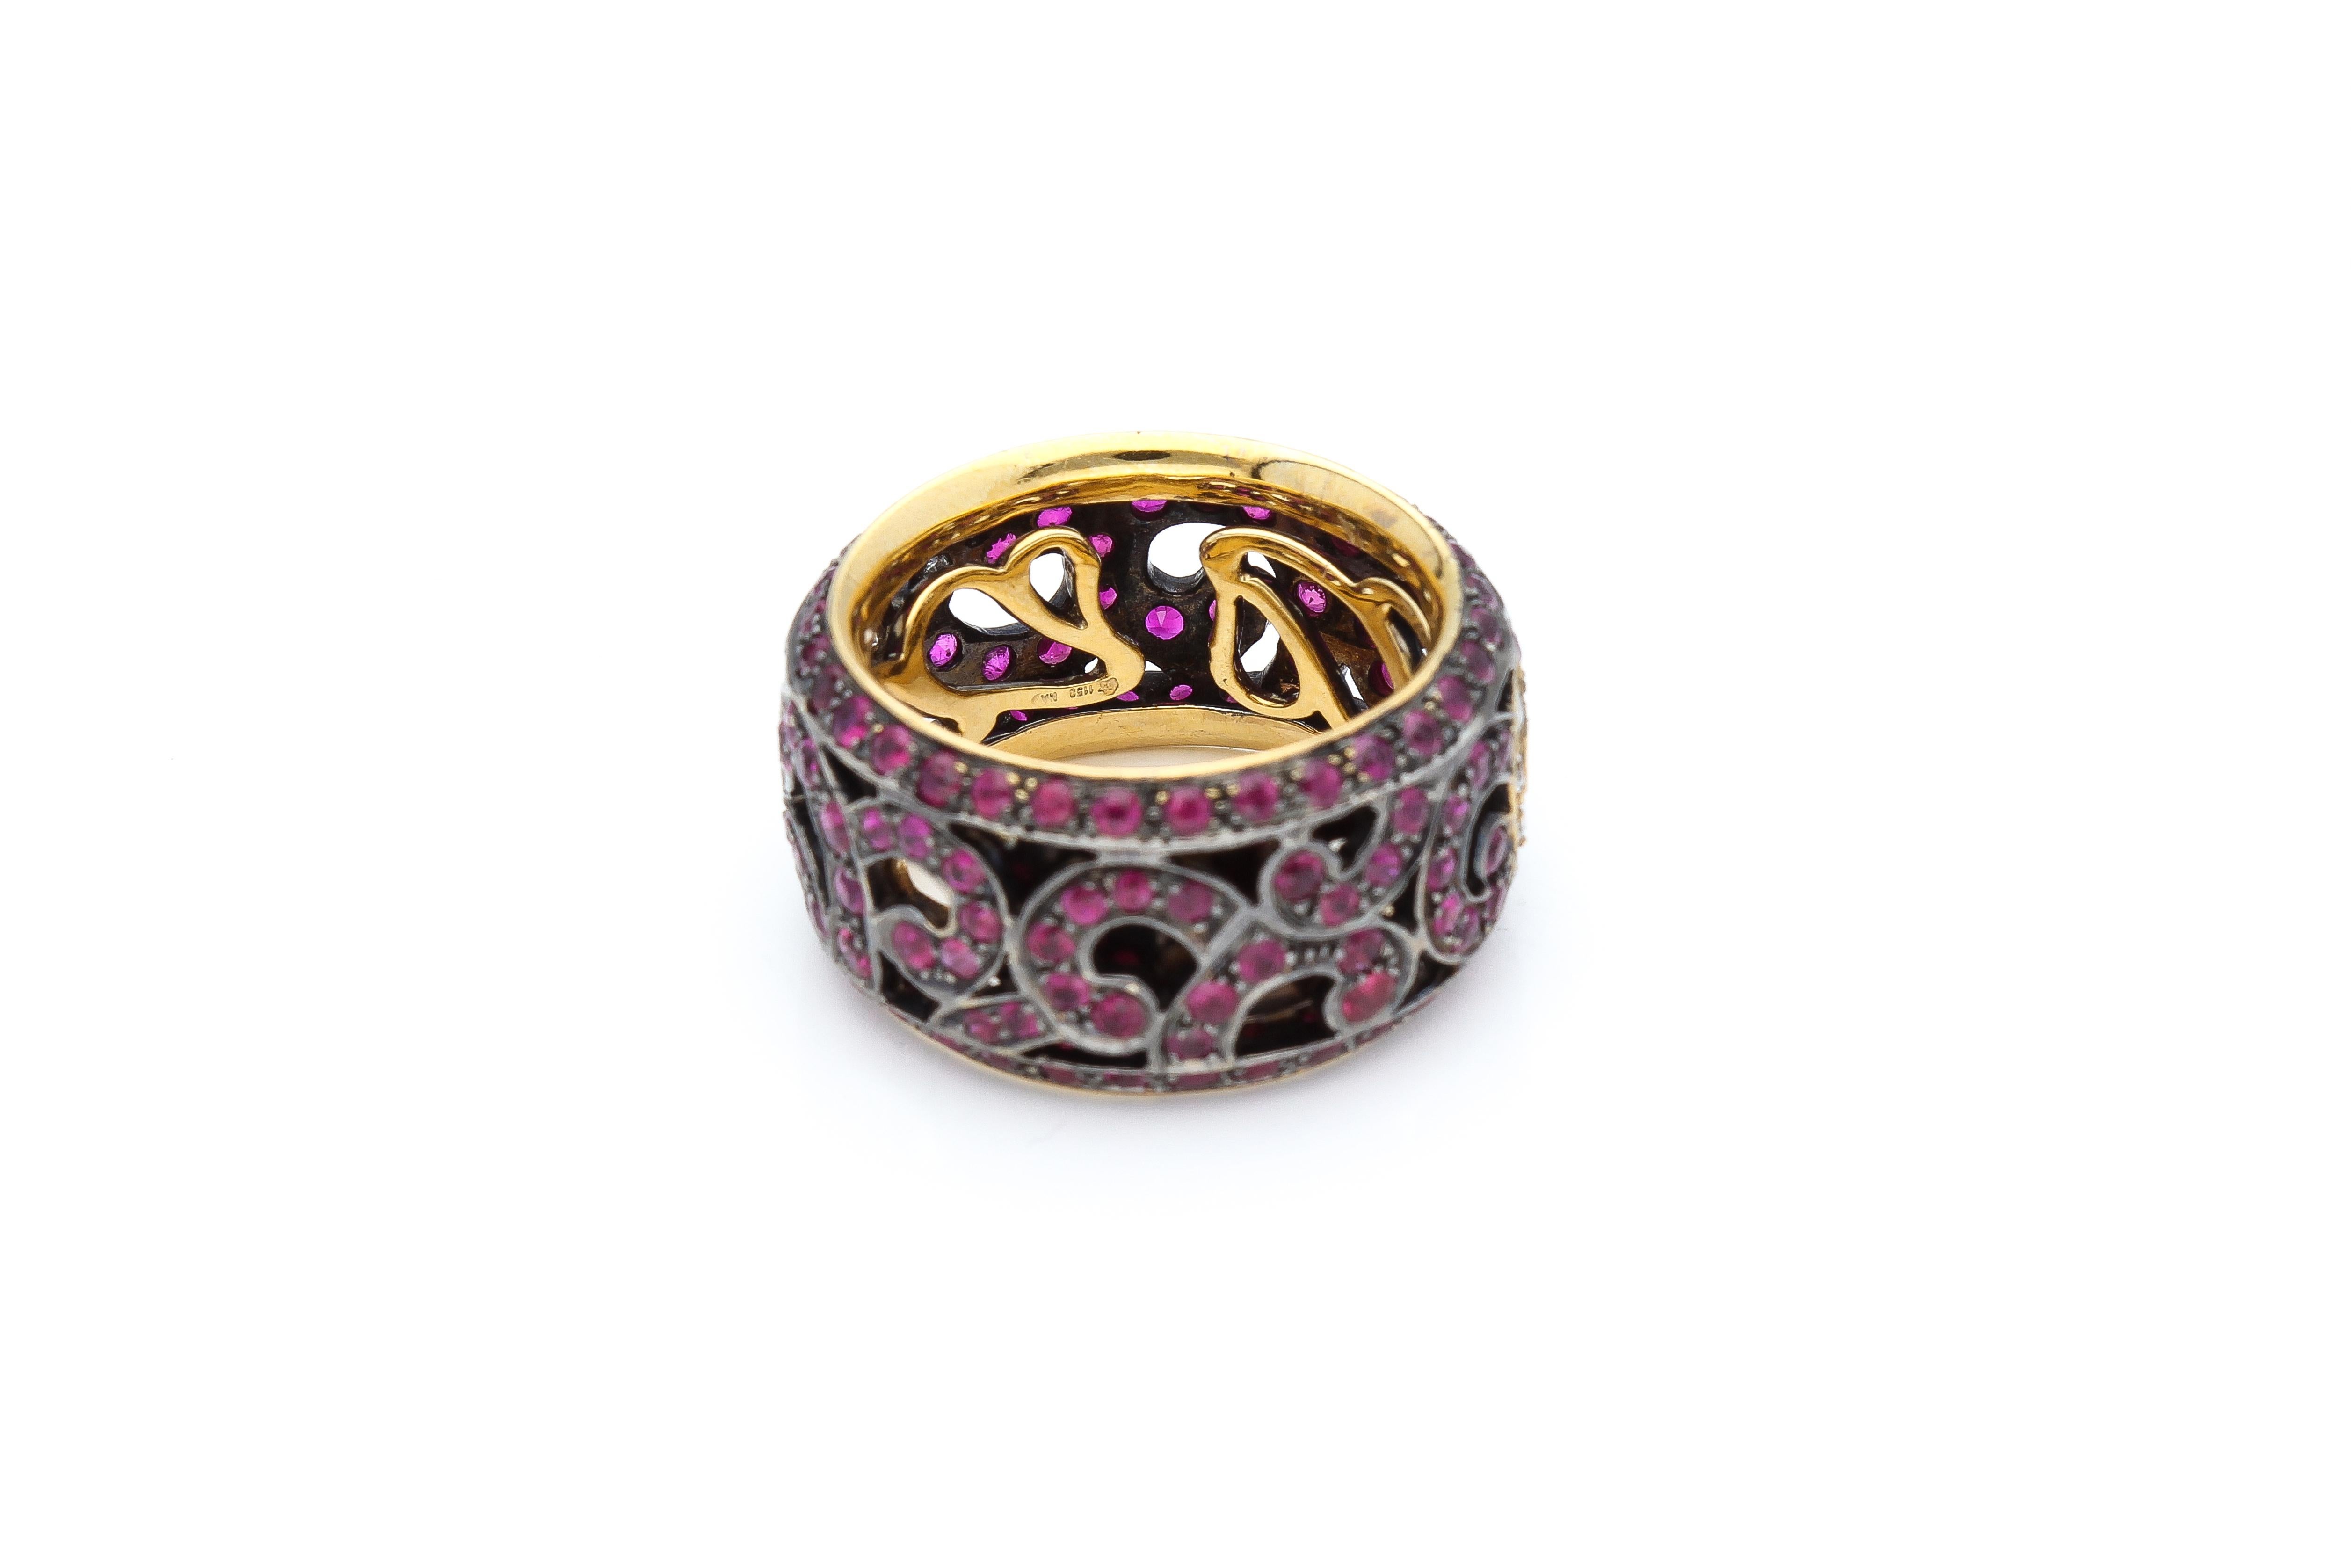 Eternity Band Ring with 4.13 ct of Rubies and 0.25 ct of Diamonds. Made in Italy For Sale 6